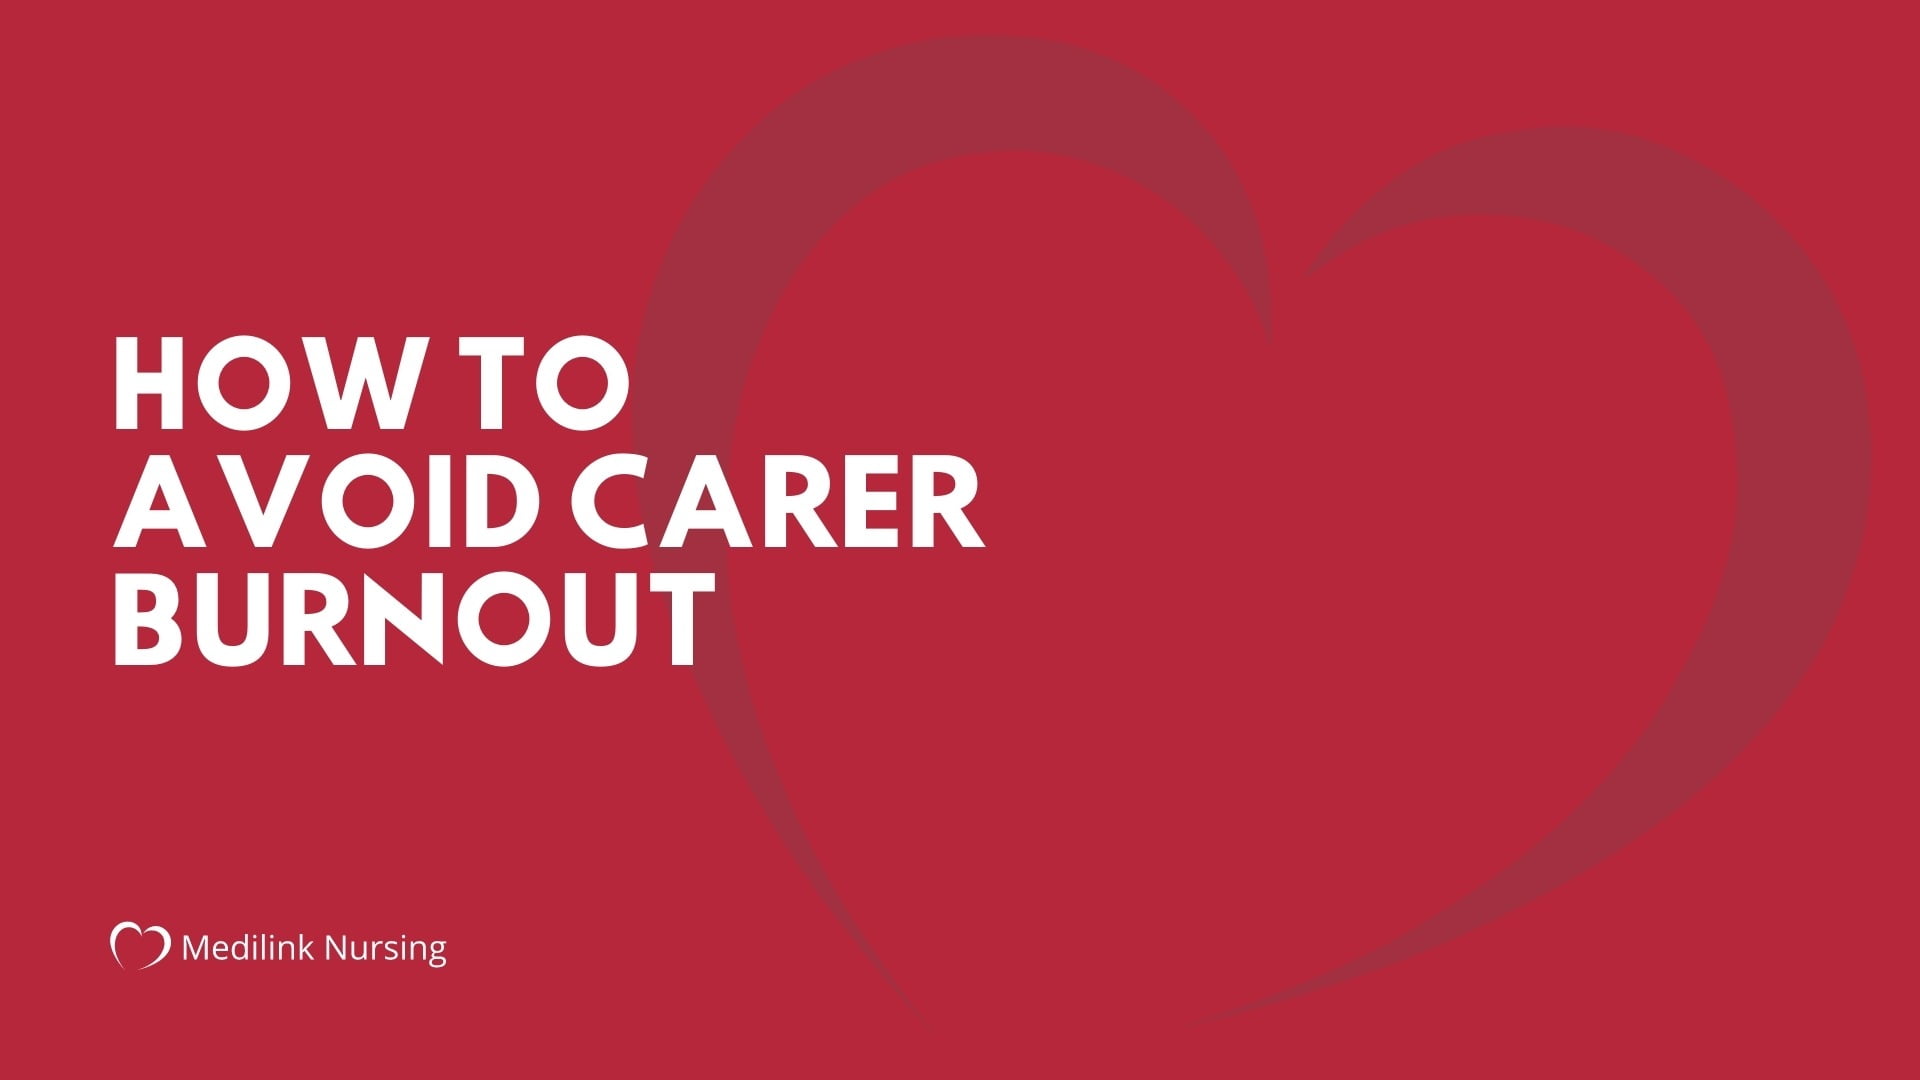 How to Avoid Carer Burnout